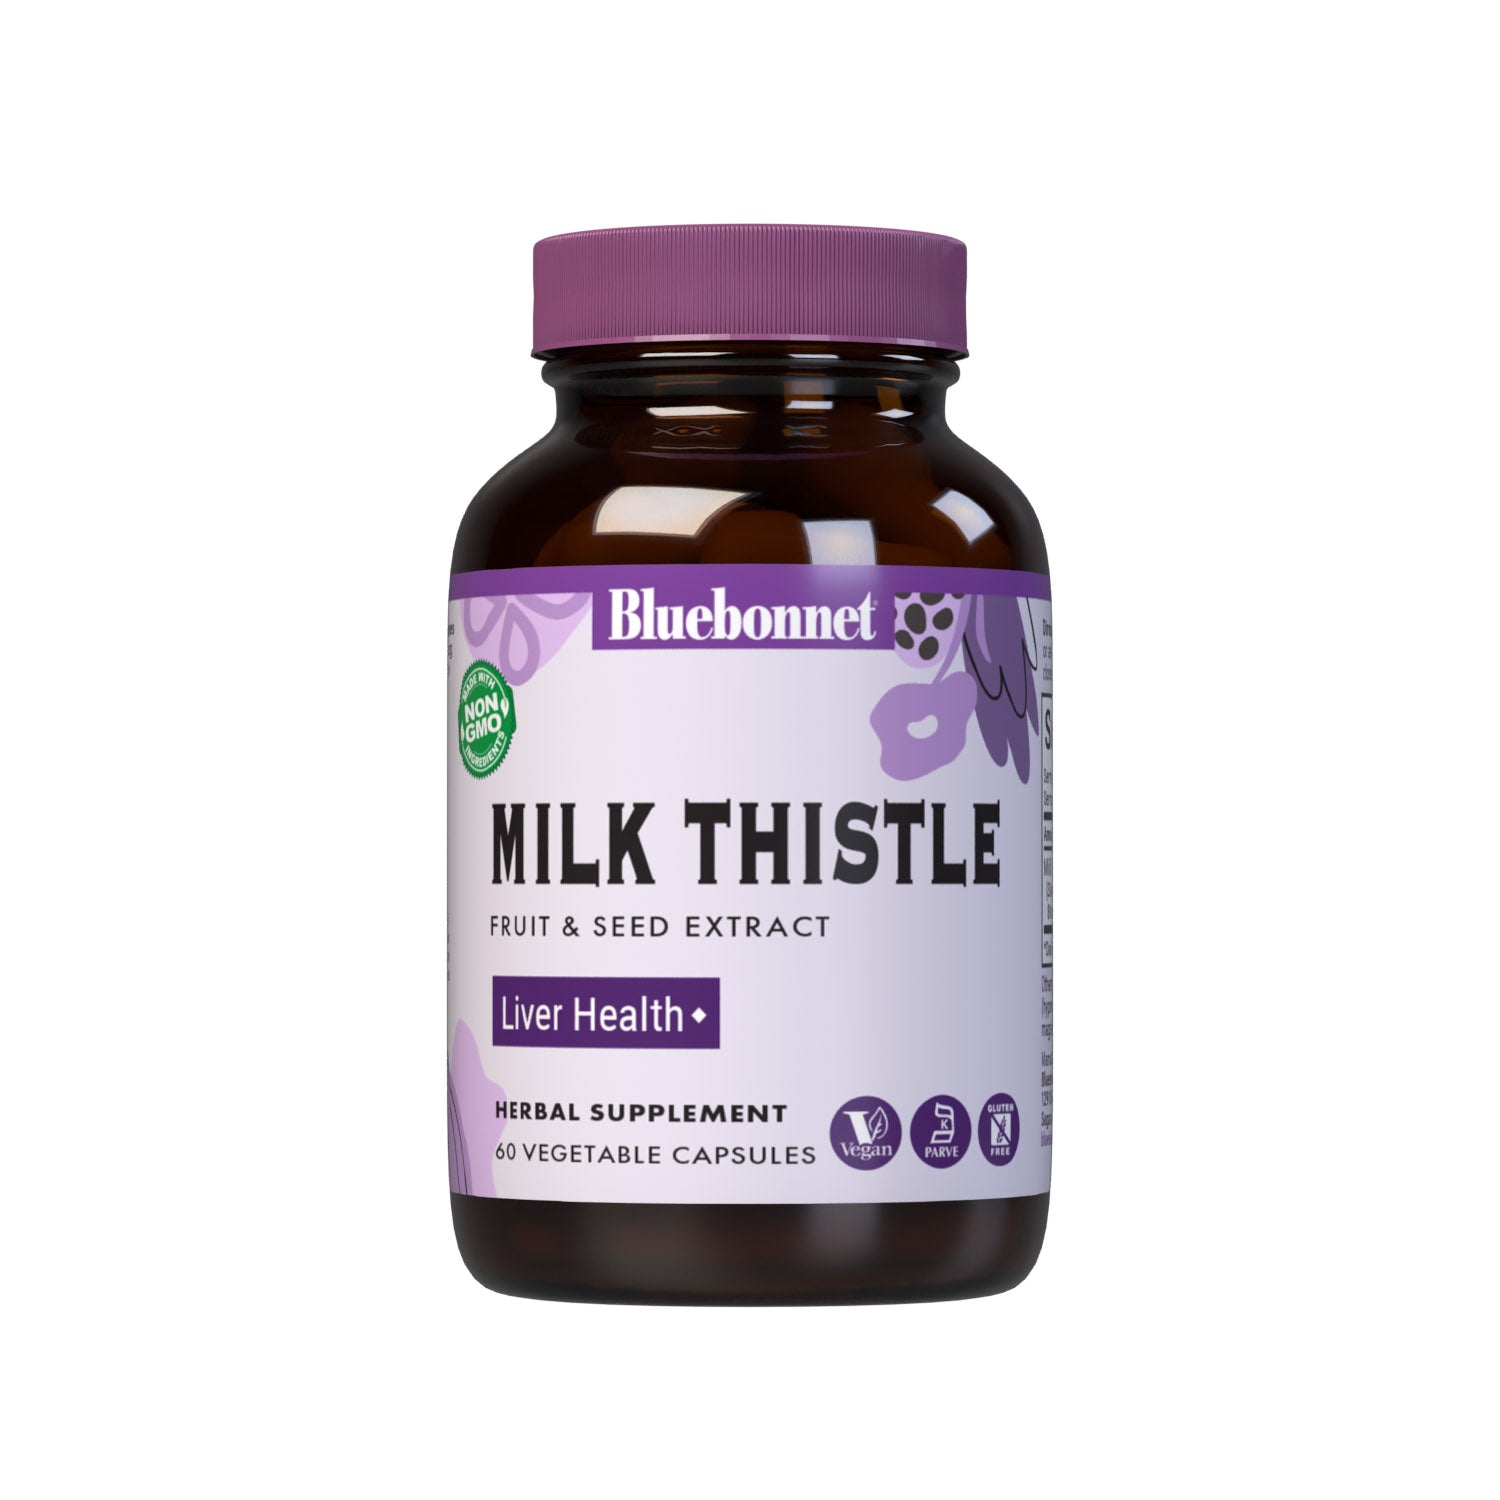 Bluebonnet’s Milk Thistle Fruit & Seed Extract 60 Vegetable Capsules contain a standardized extract from Indena of total flavonoids [including silymarins], the most researched active constituents found in milk thistle. A clean and gentle water-based extraction method is employed to capture and preserve milk thistle’s most valuable components. #size_60 count